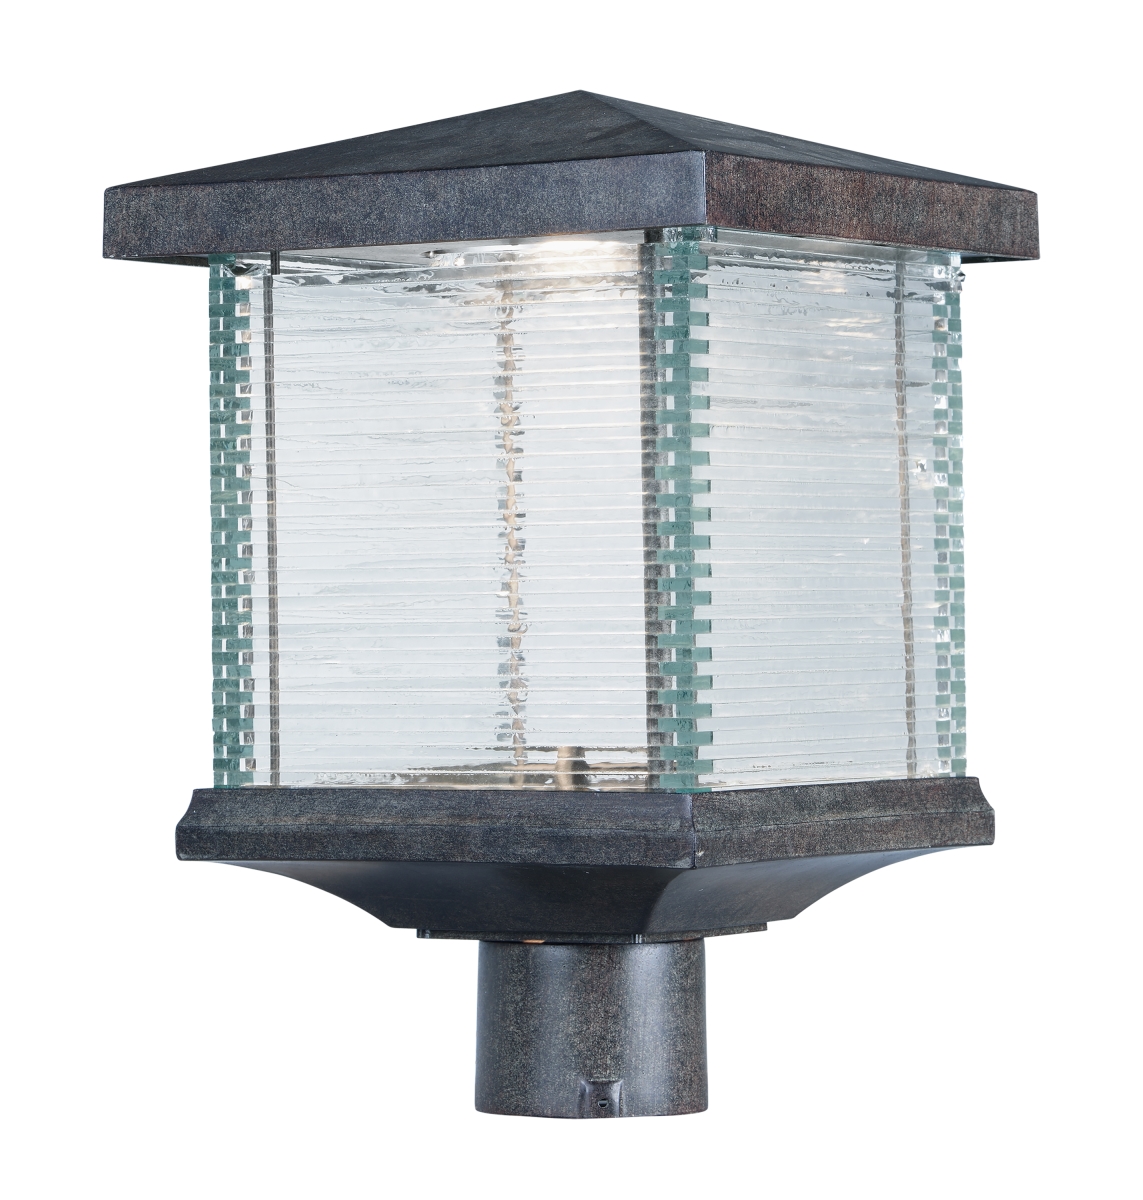 55735clet 15 In. Triumph Vx Led Outdoor Post Lantern, Earth Tone